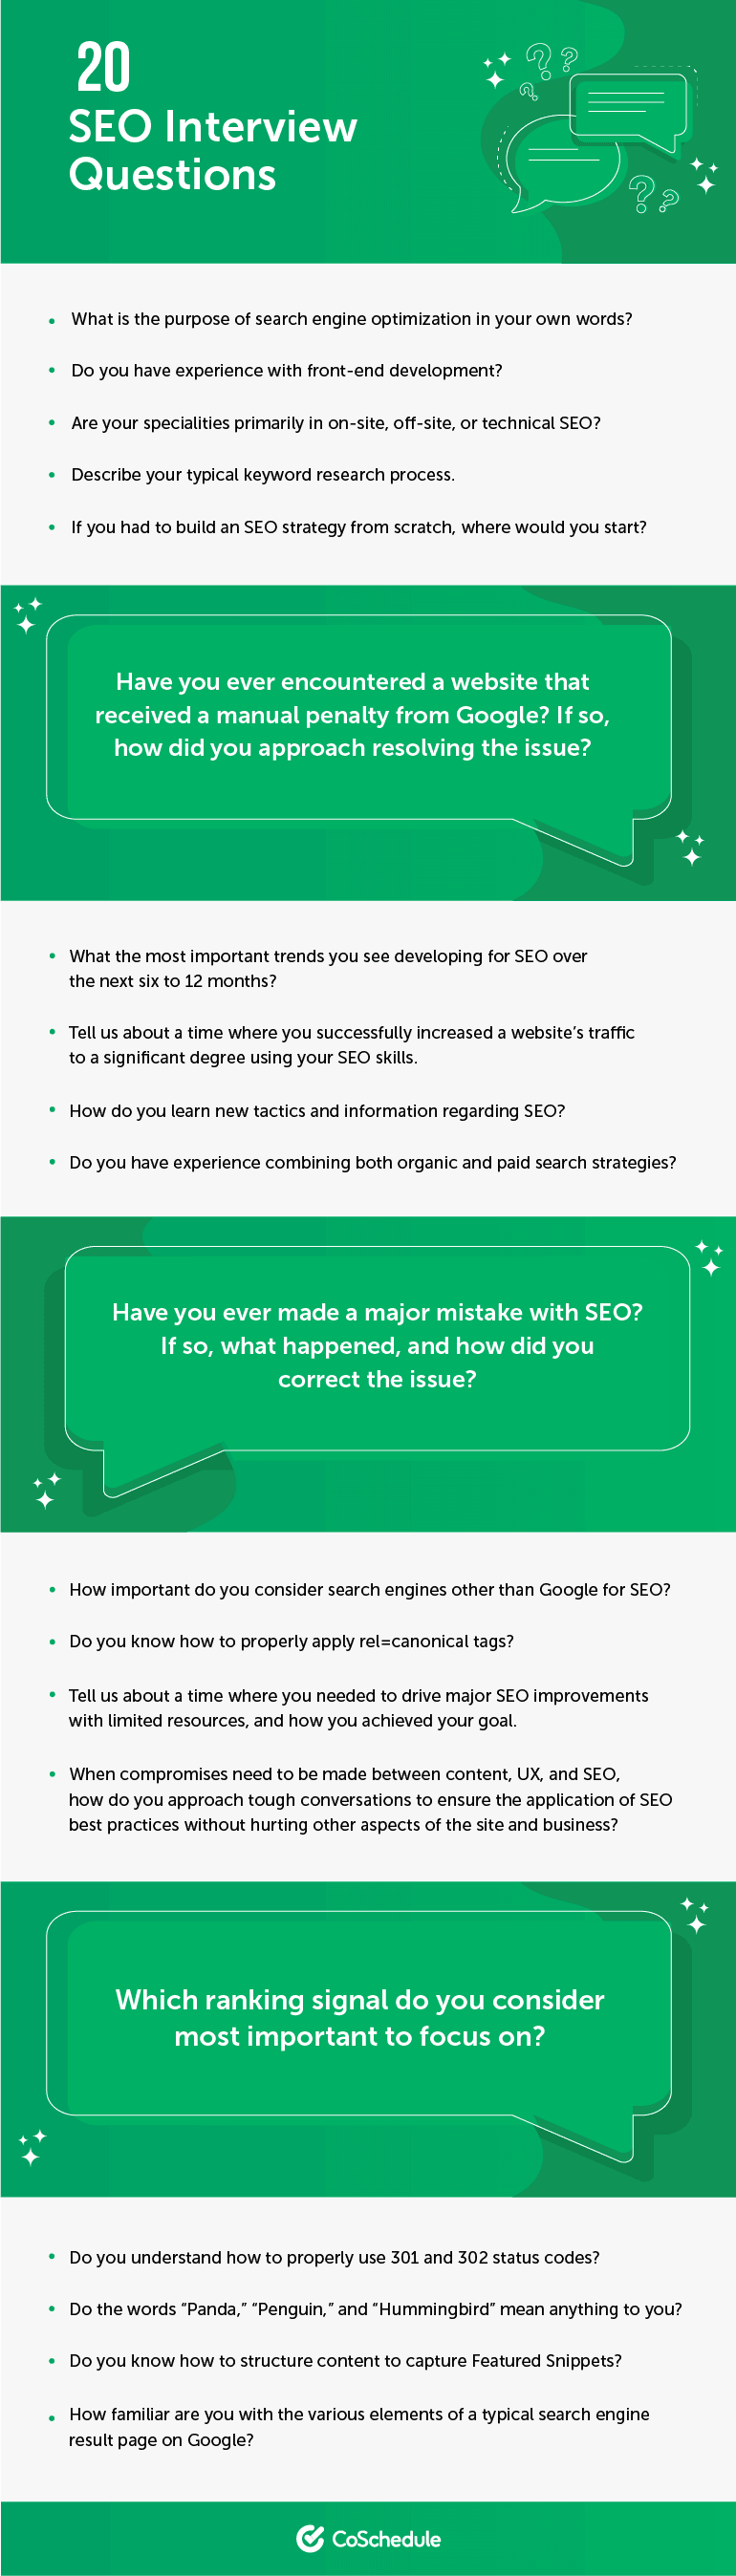 List of 20 SEO Interview Questions.